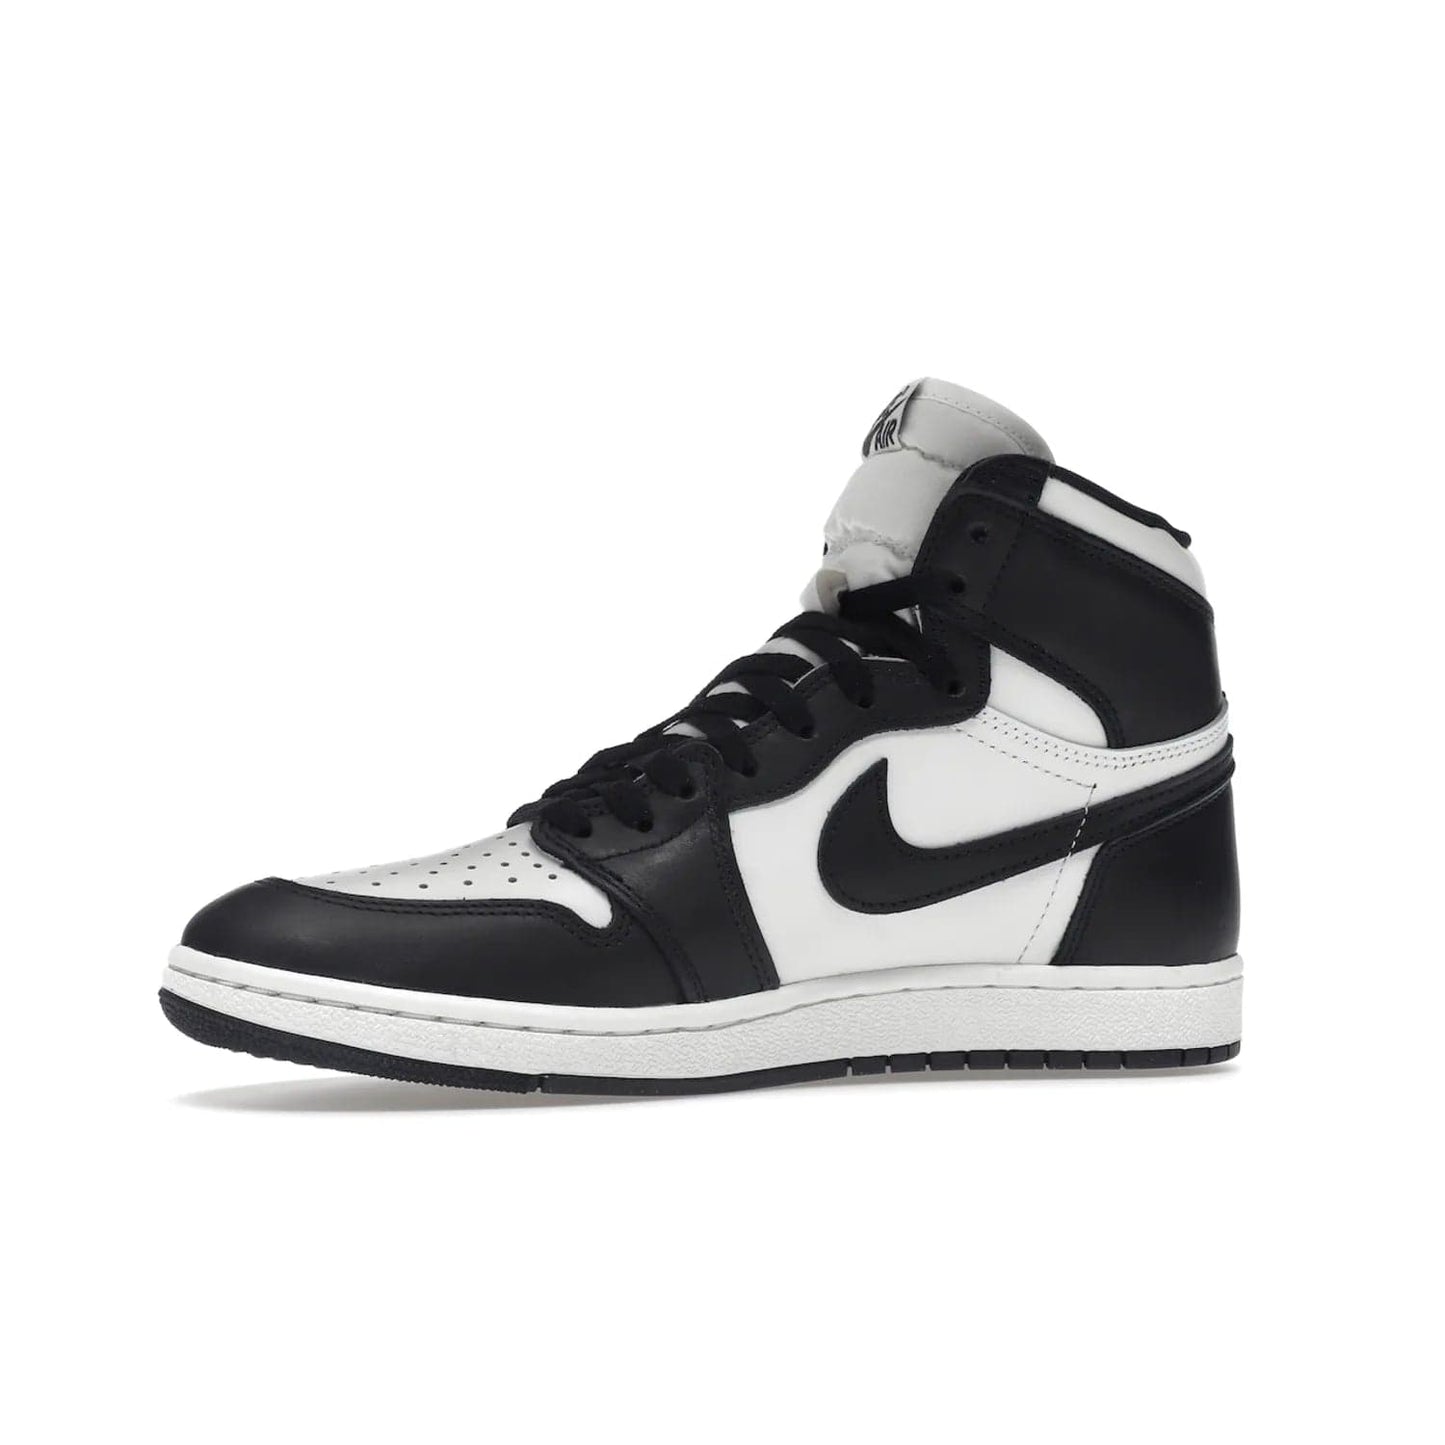 Jordan 1 Retro High 85 Black White (2023) - Image 17 - Only at www.BallersClubKickz.com - Brand new Jordan 1 Retro High 85 Black White (2023) now available. A classic color scheme of black and white leather uppers with signature Nike Air logo on the tongue. Must-have for any Air Jordan fan. Available February 15, 2023.